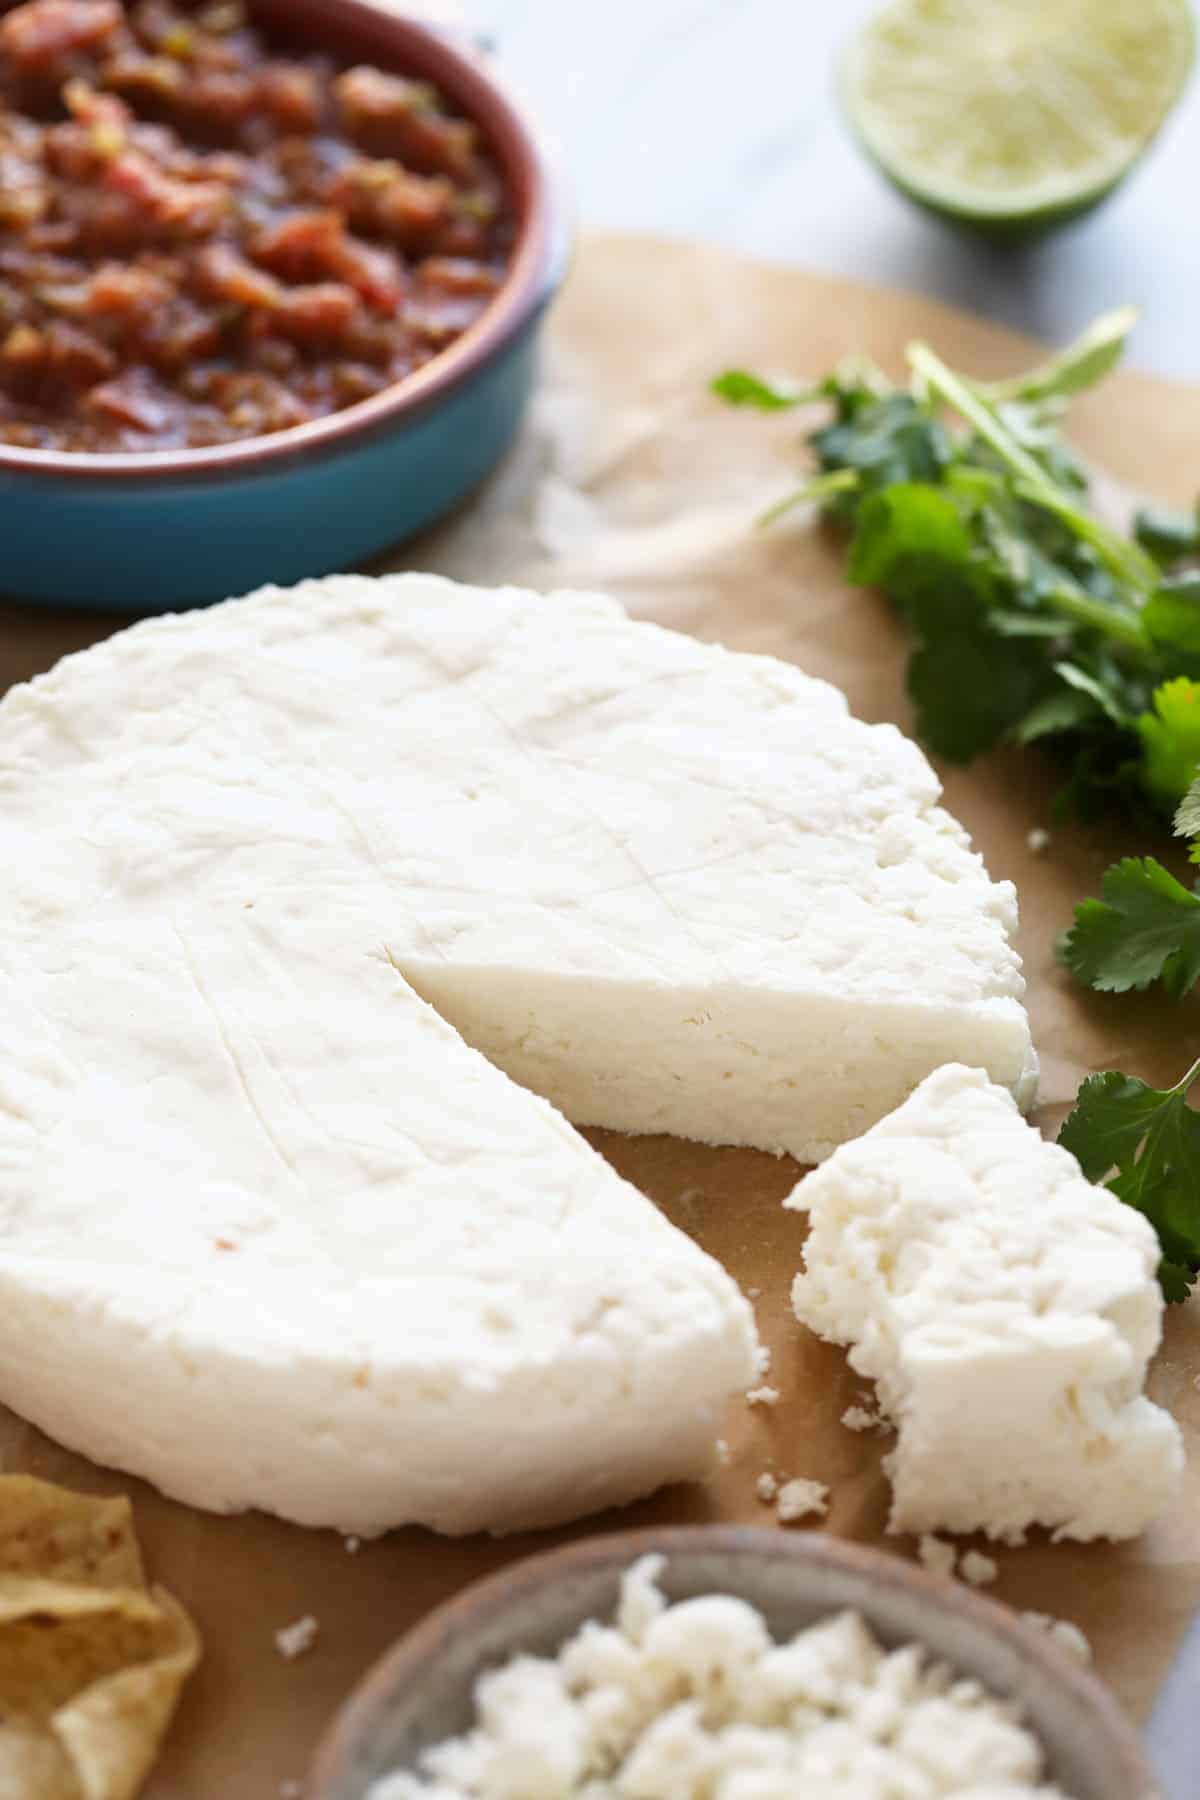 Cotija Cheese vs Queso Fresco: How Are They Different & When to Use Each